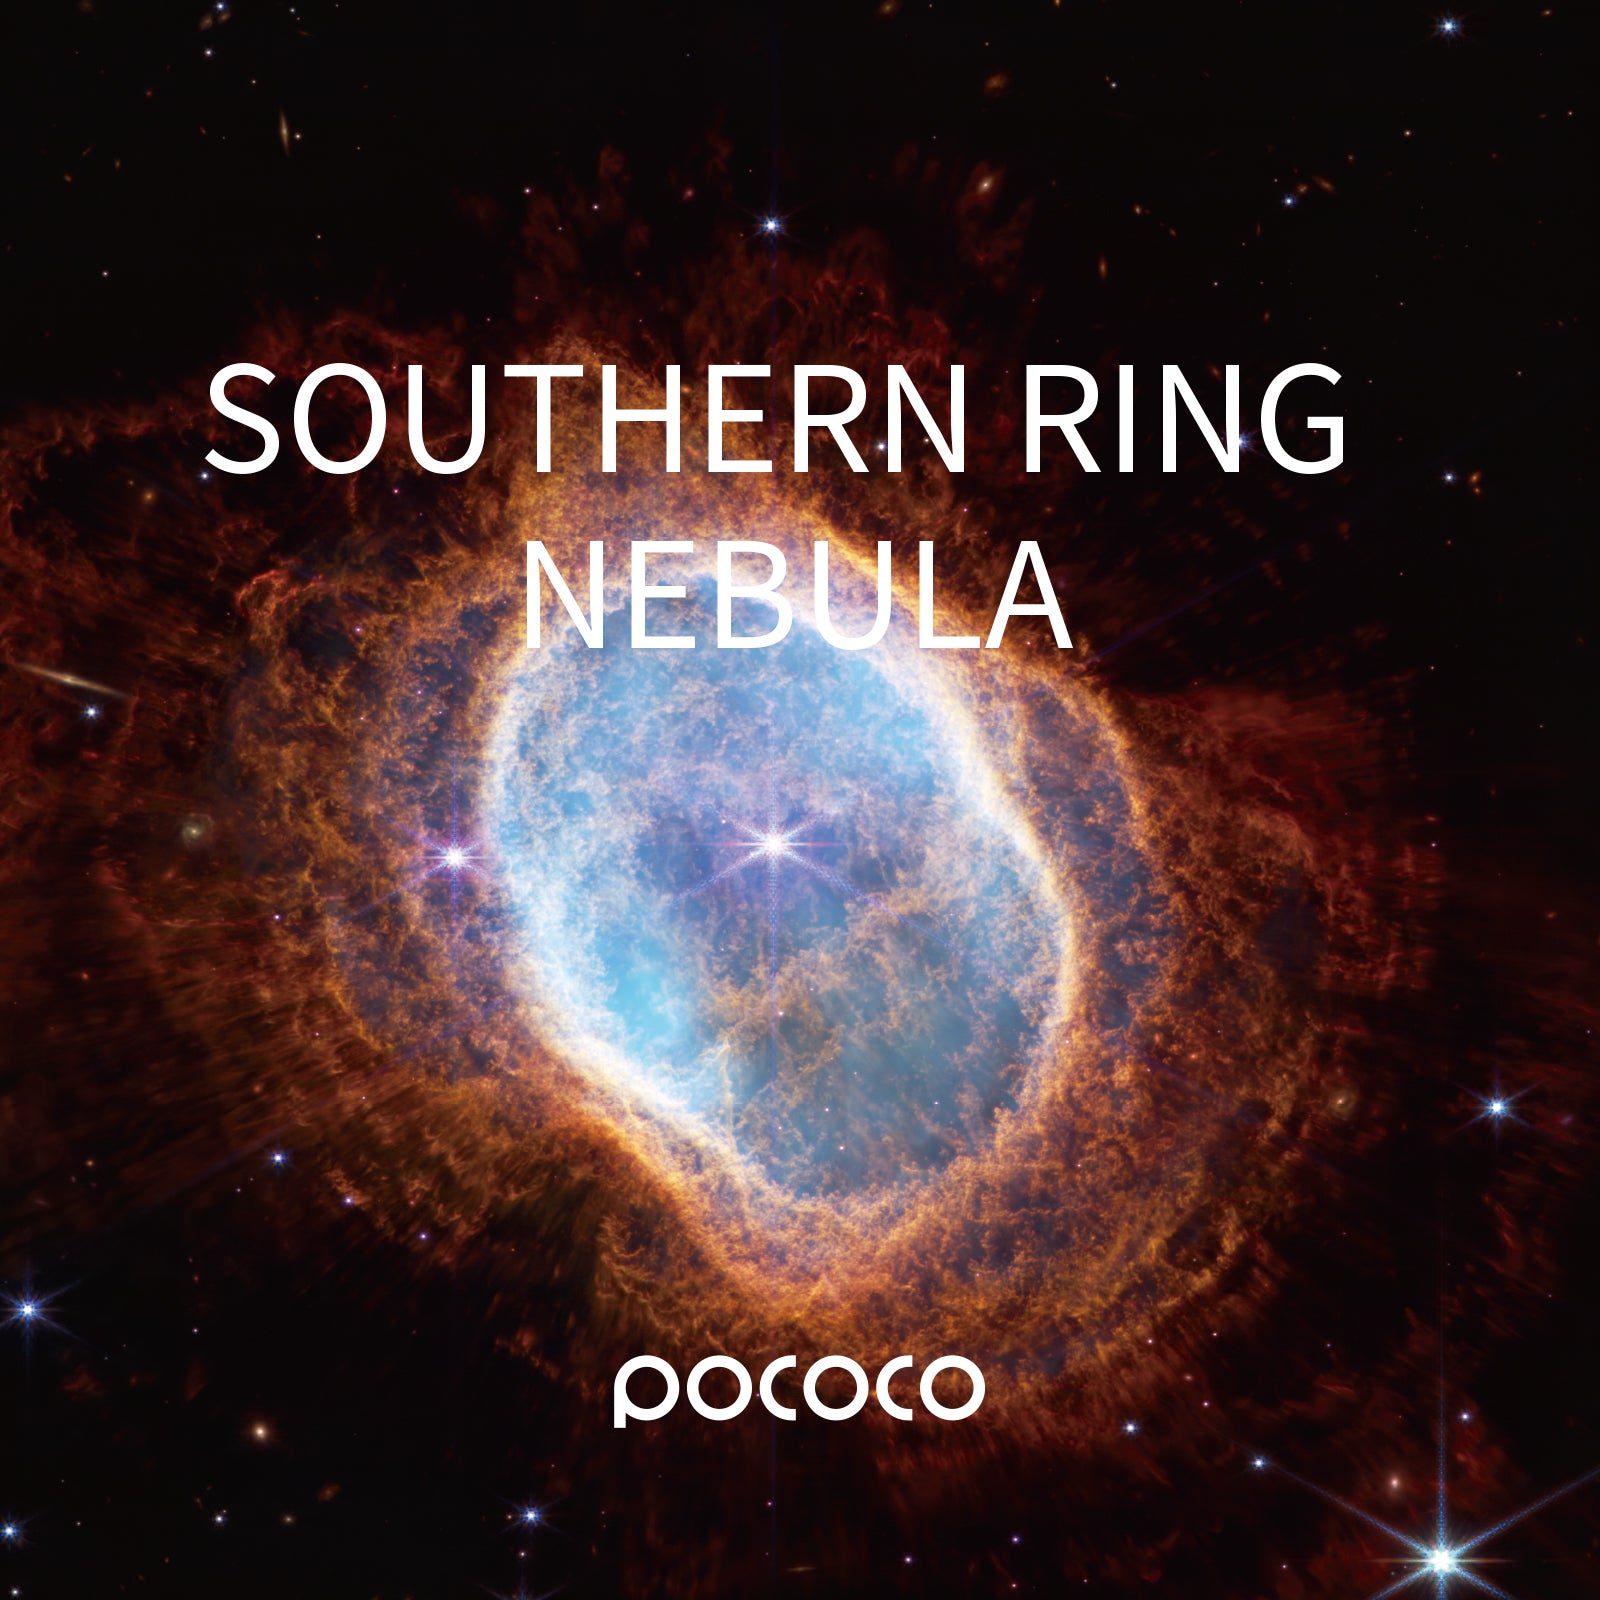 POCOCO Galaxy Projector Disc - Southern Ring Nebula